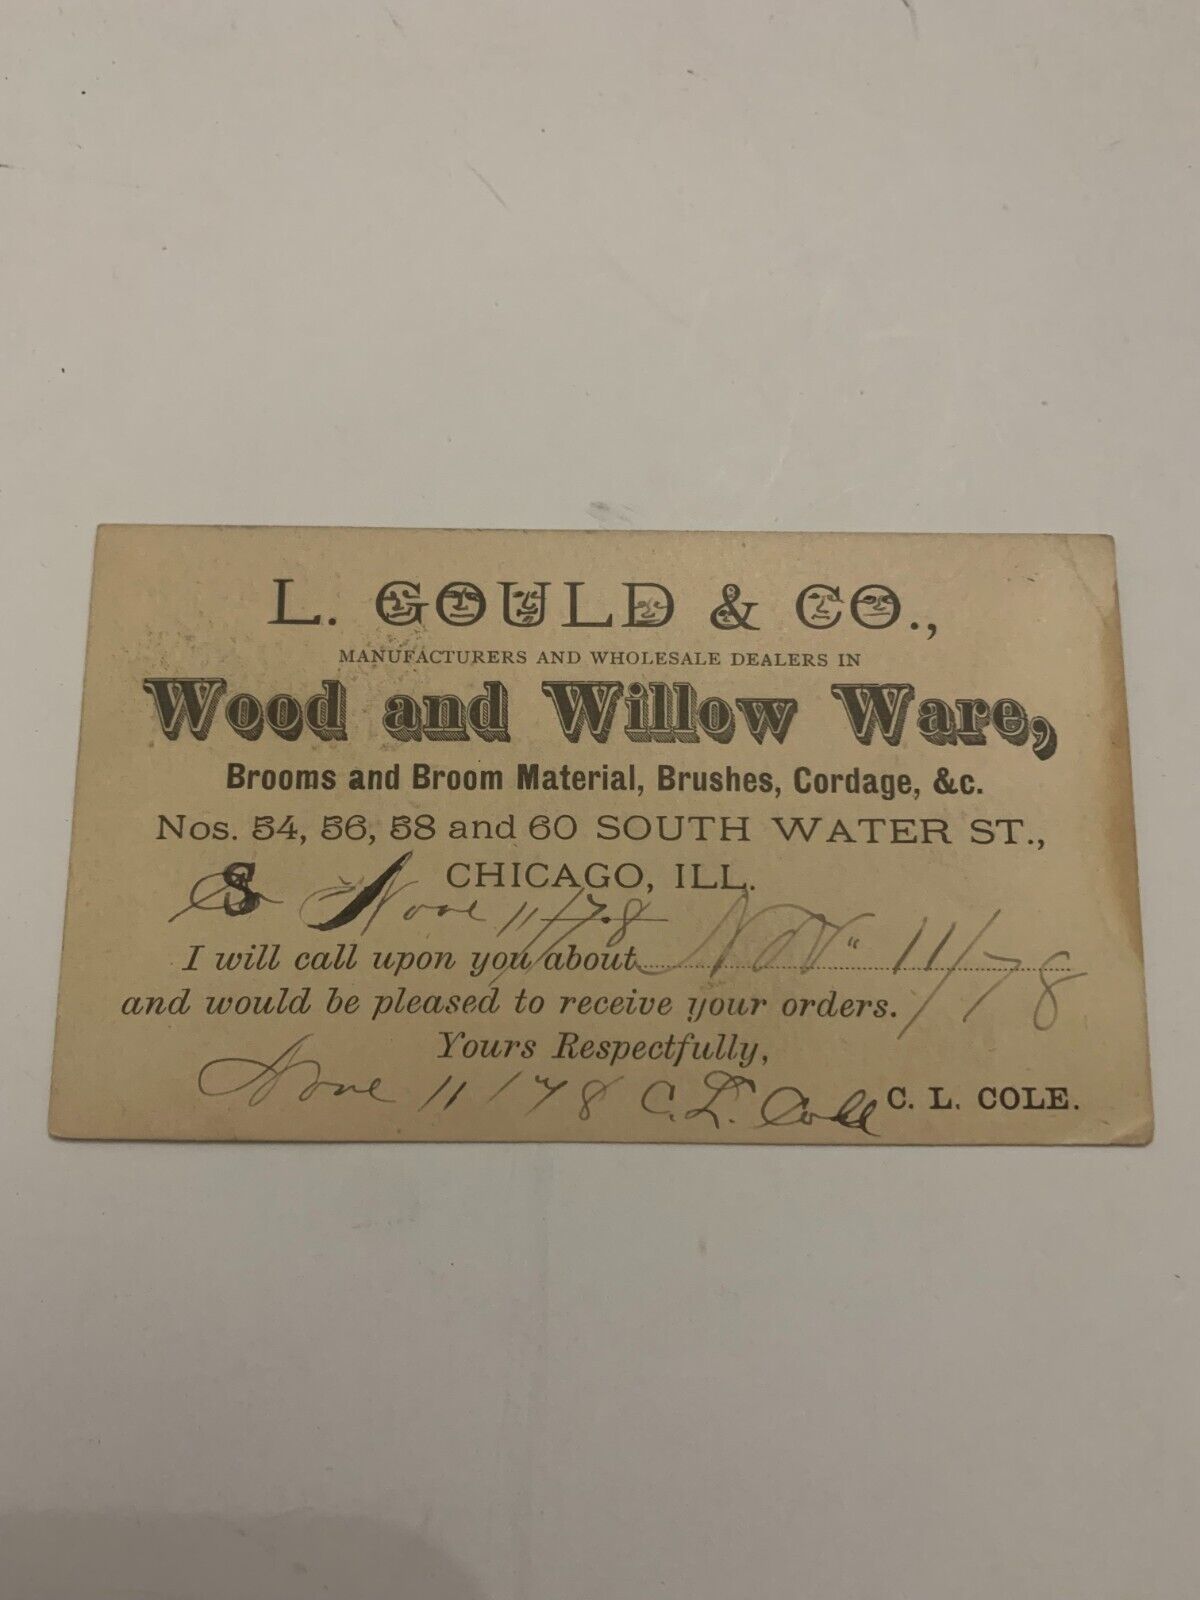 1878 L. Gould & Co. Wood and Willow Ware Chicago Illinois Advertising Postcard